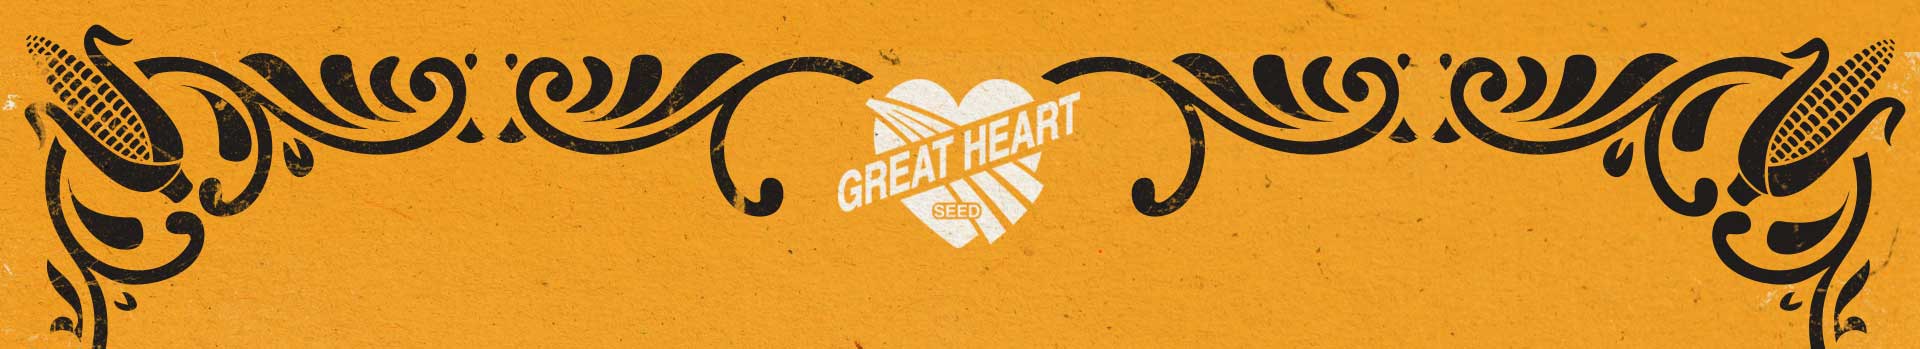 Great Heart Seed